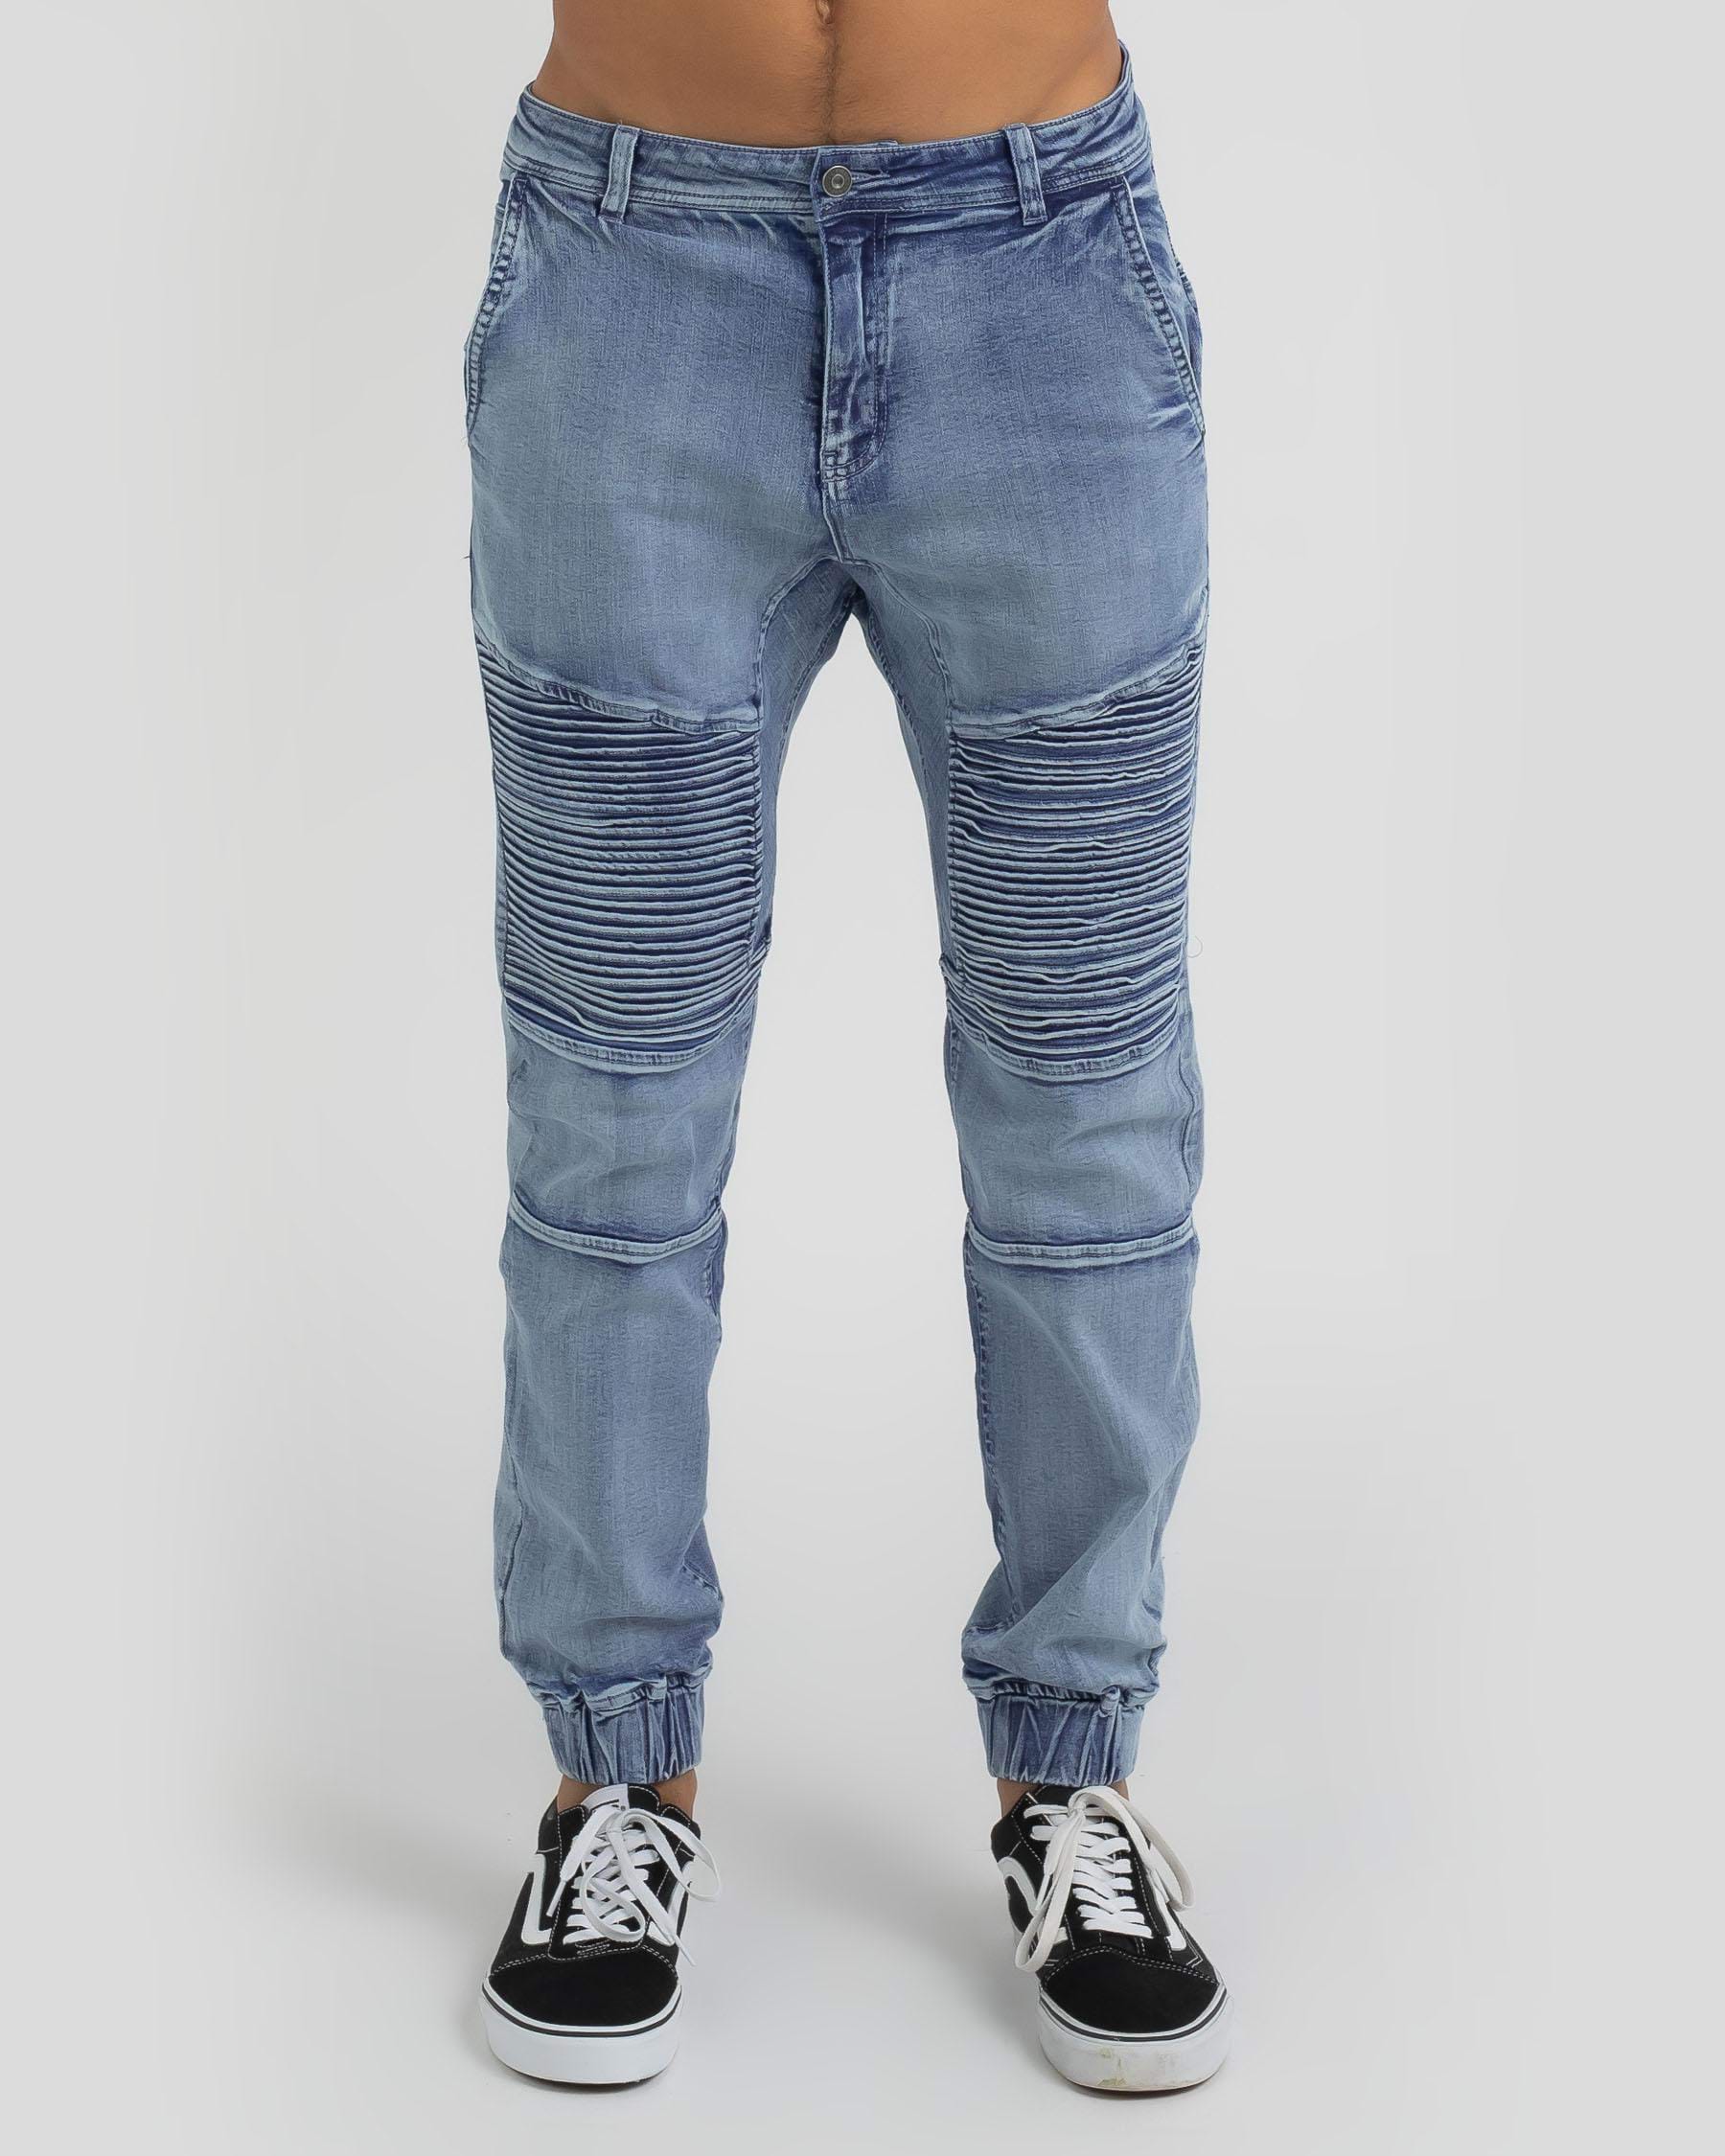 Lucid Combination Jeans In Light Blue - Fast Shipping & Easy Returns ...